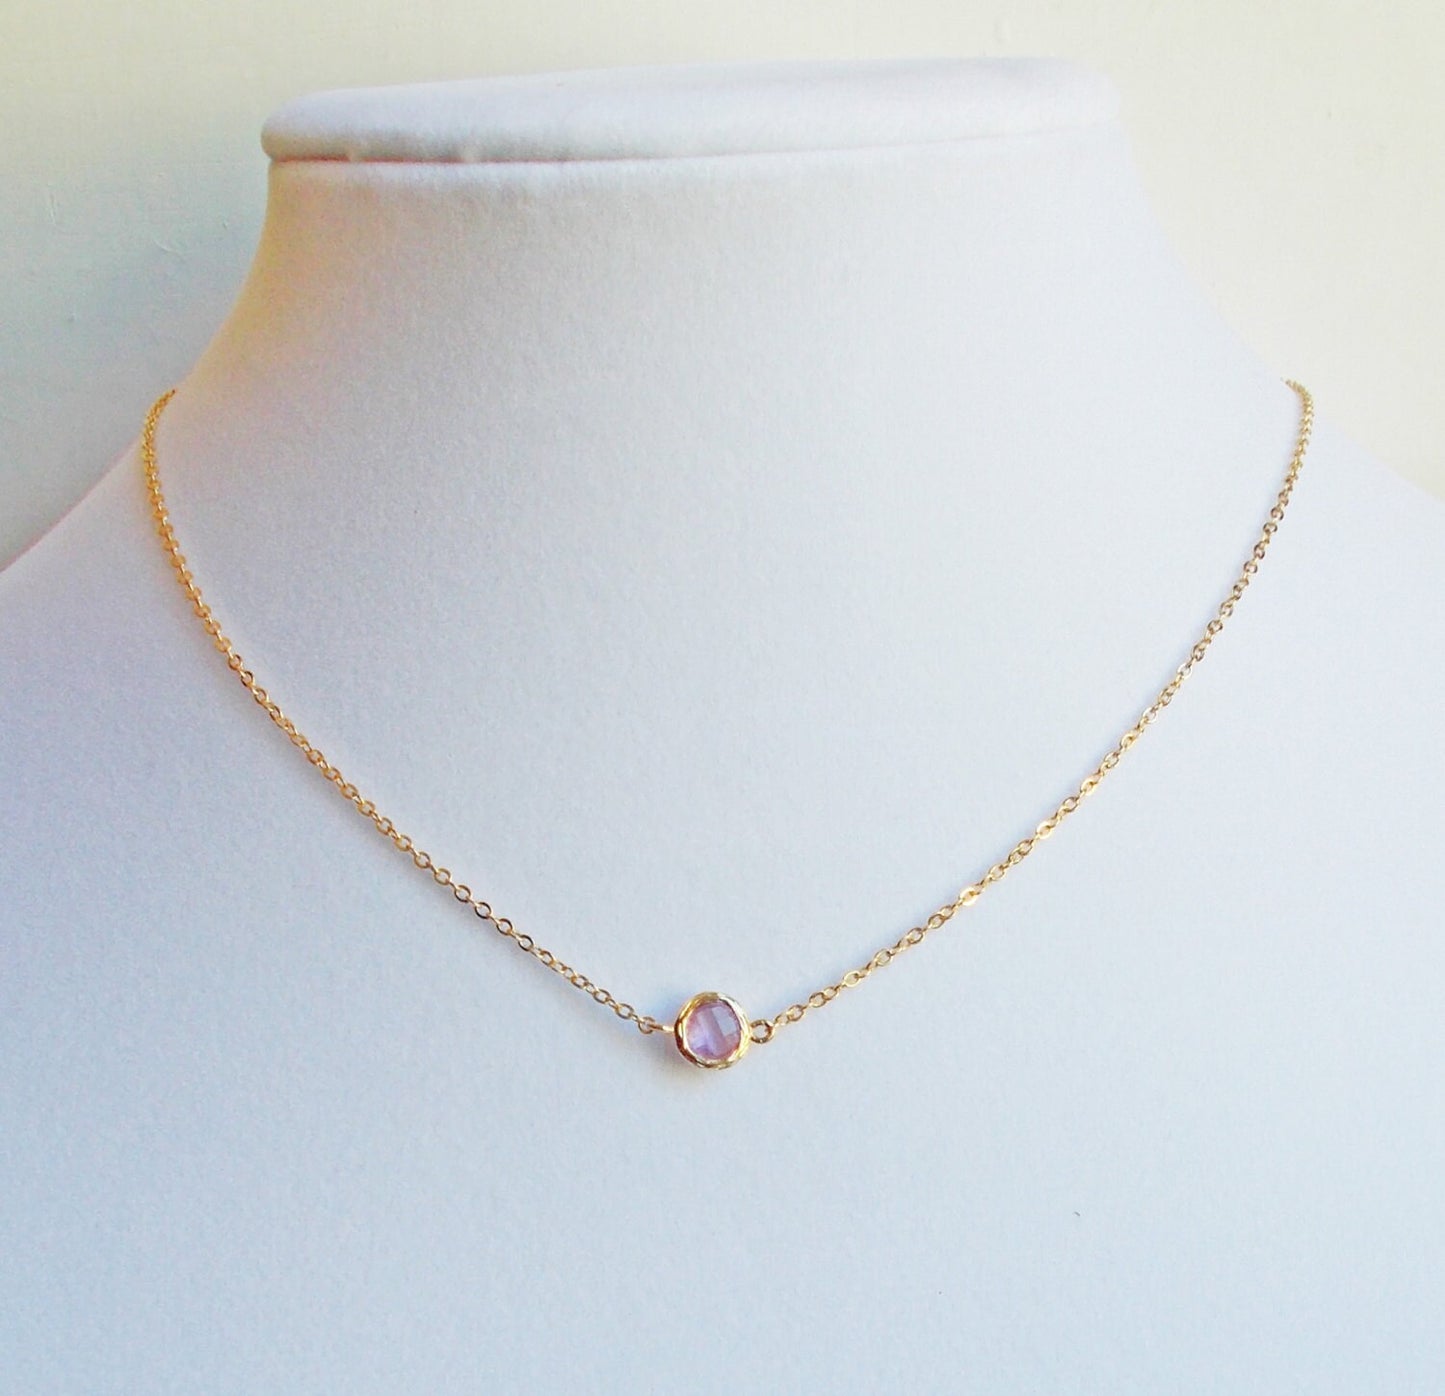 Mini Lavender Pop 16K Gold Plated Stacking Necklace - BridesMaid Gift - Gemstone Necklace - Light Amethyst Stone Necklace